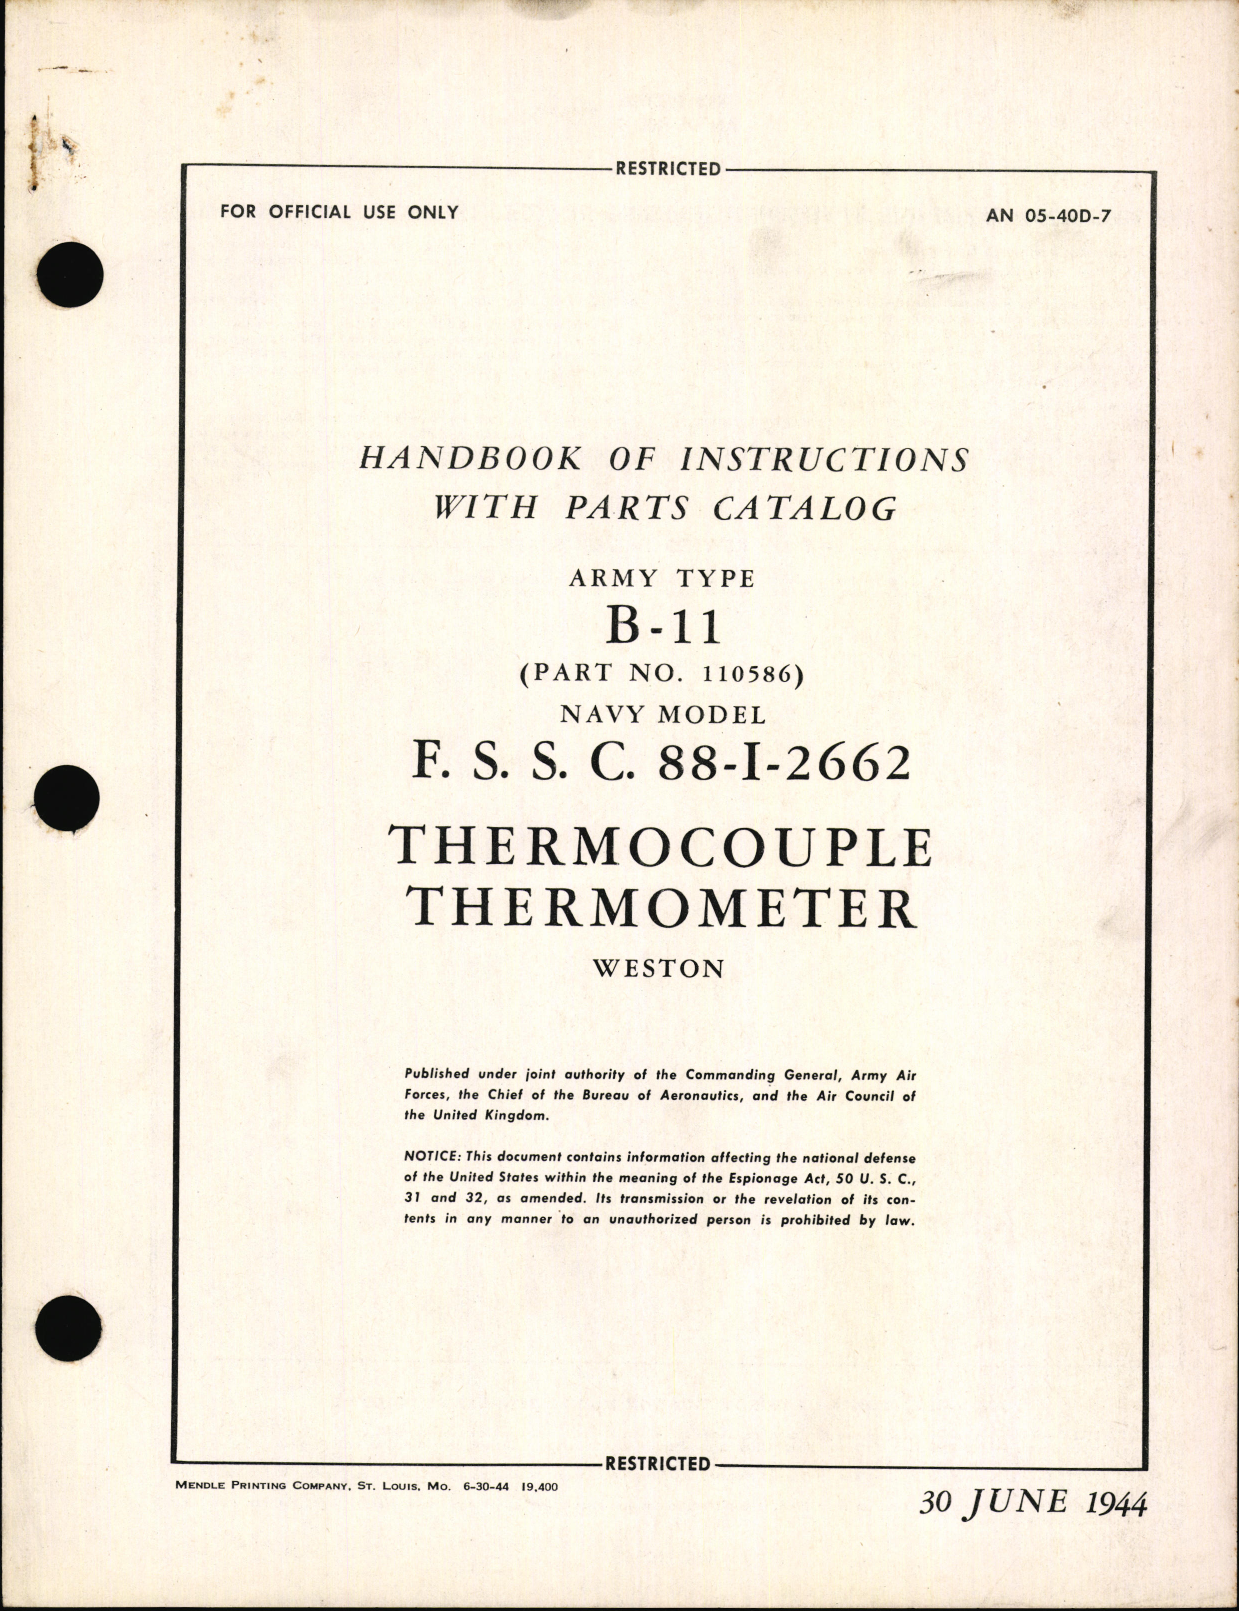 Sample page 1 from AirCorps Library document: Handbook of Instructions with Parts Catalog for Type B-11 and F.S.S.C. 88-I-2662 Thermocouple Thermometer